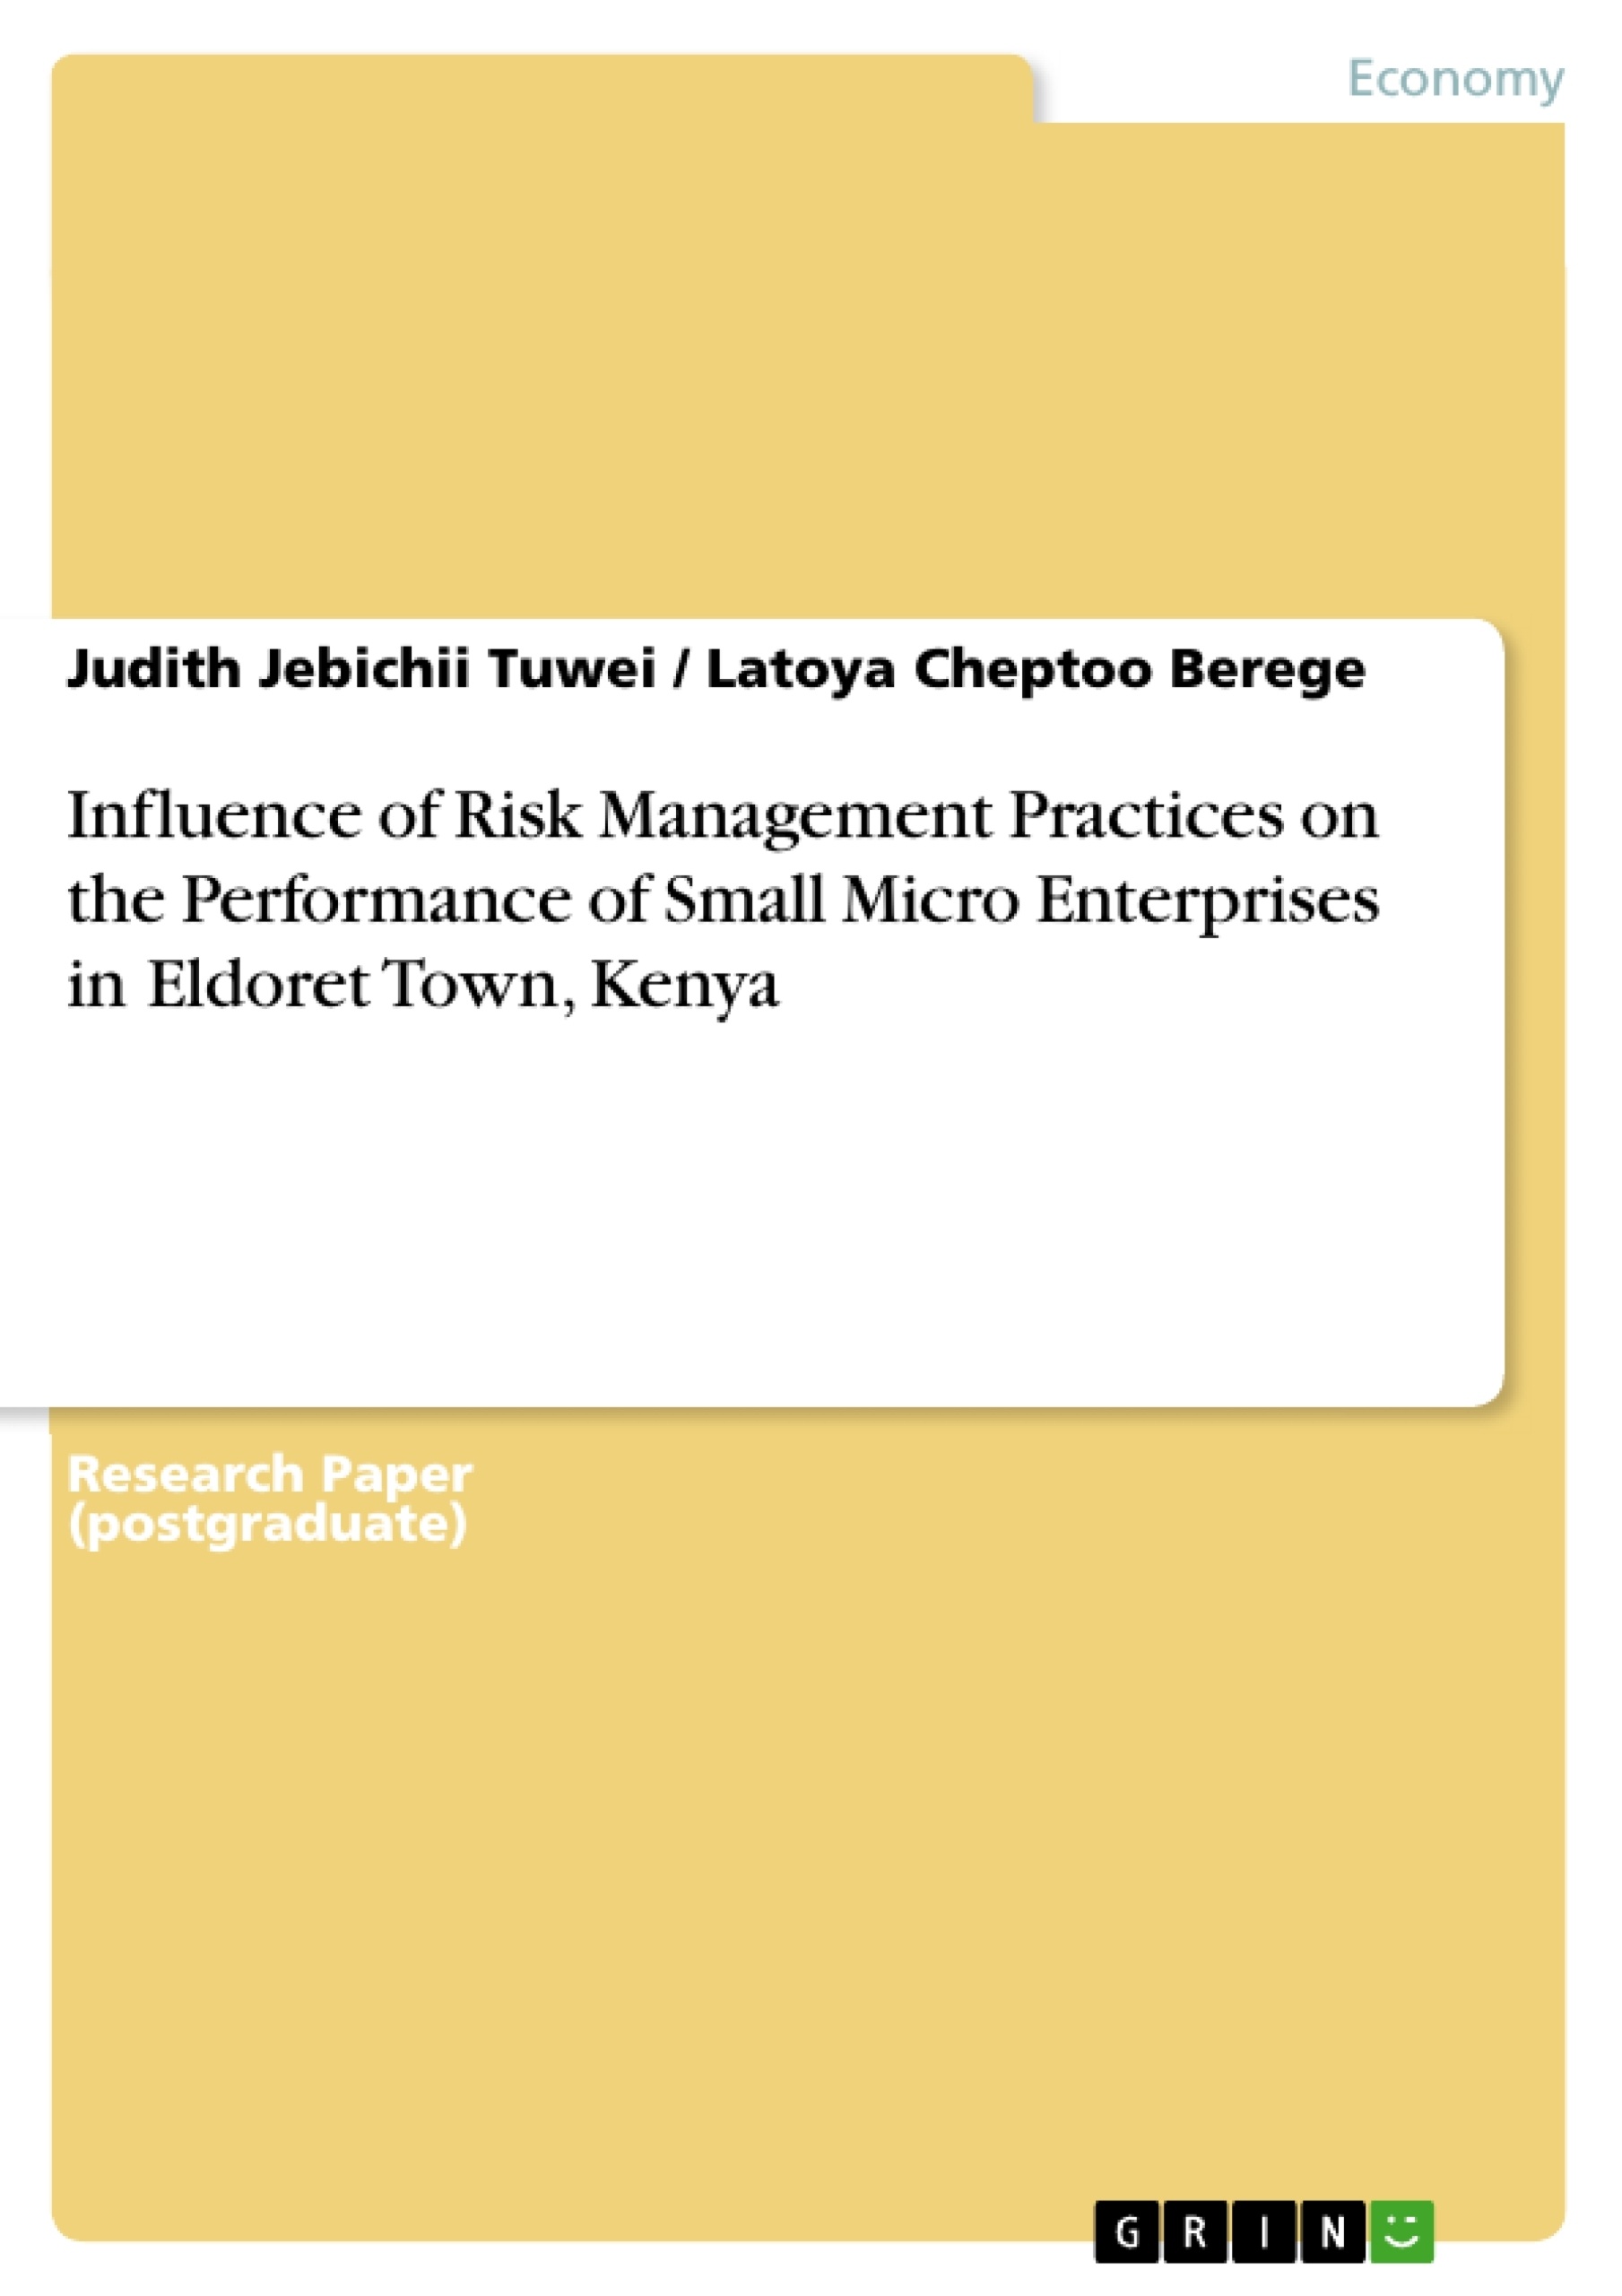 Title: Influence of Risk Management Practices on the Performance of Small Micro Enterprises in Eldoret Town, Kenya